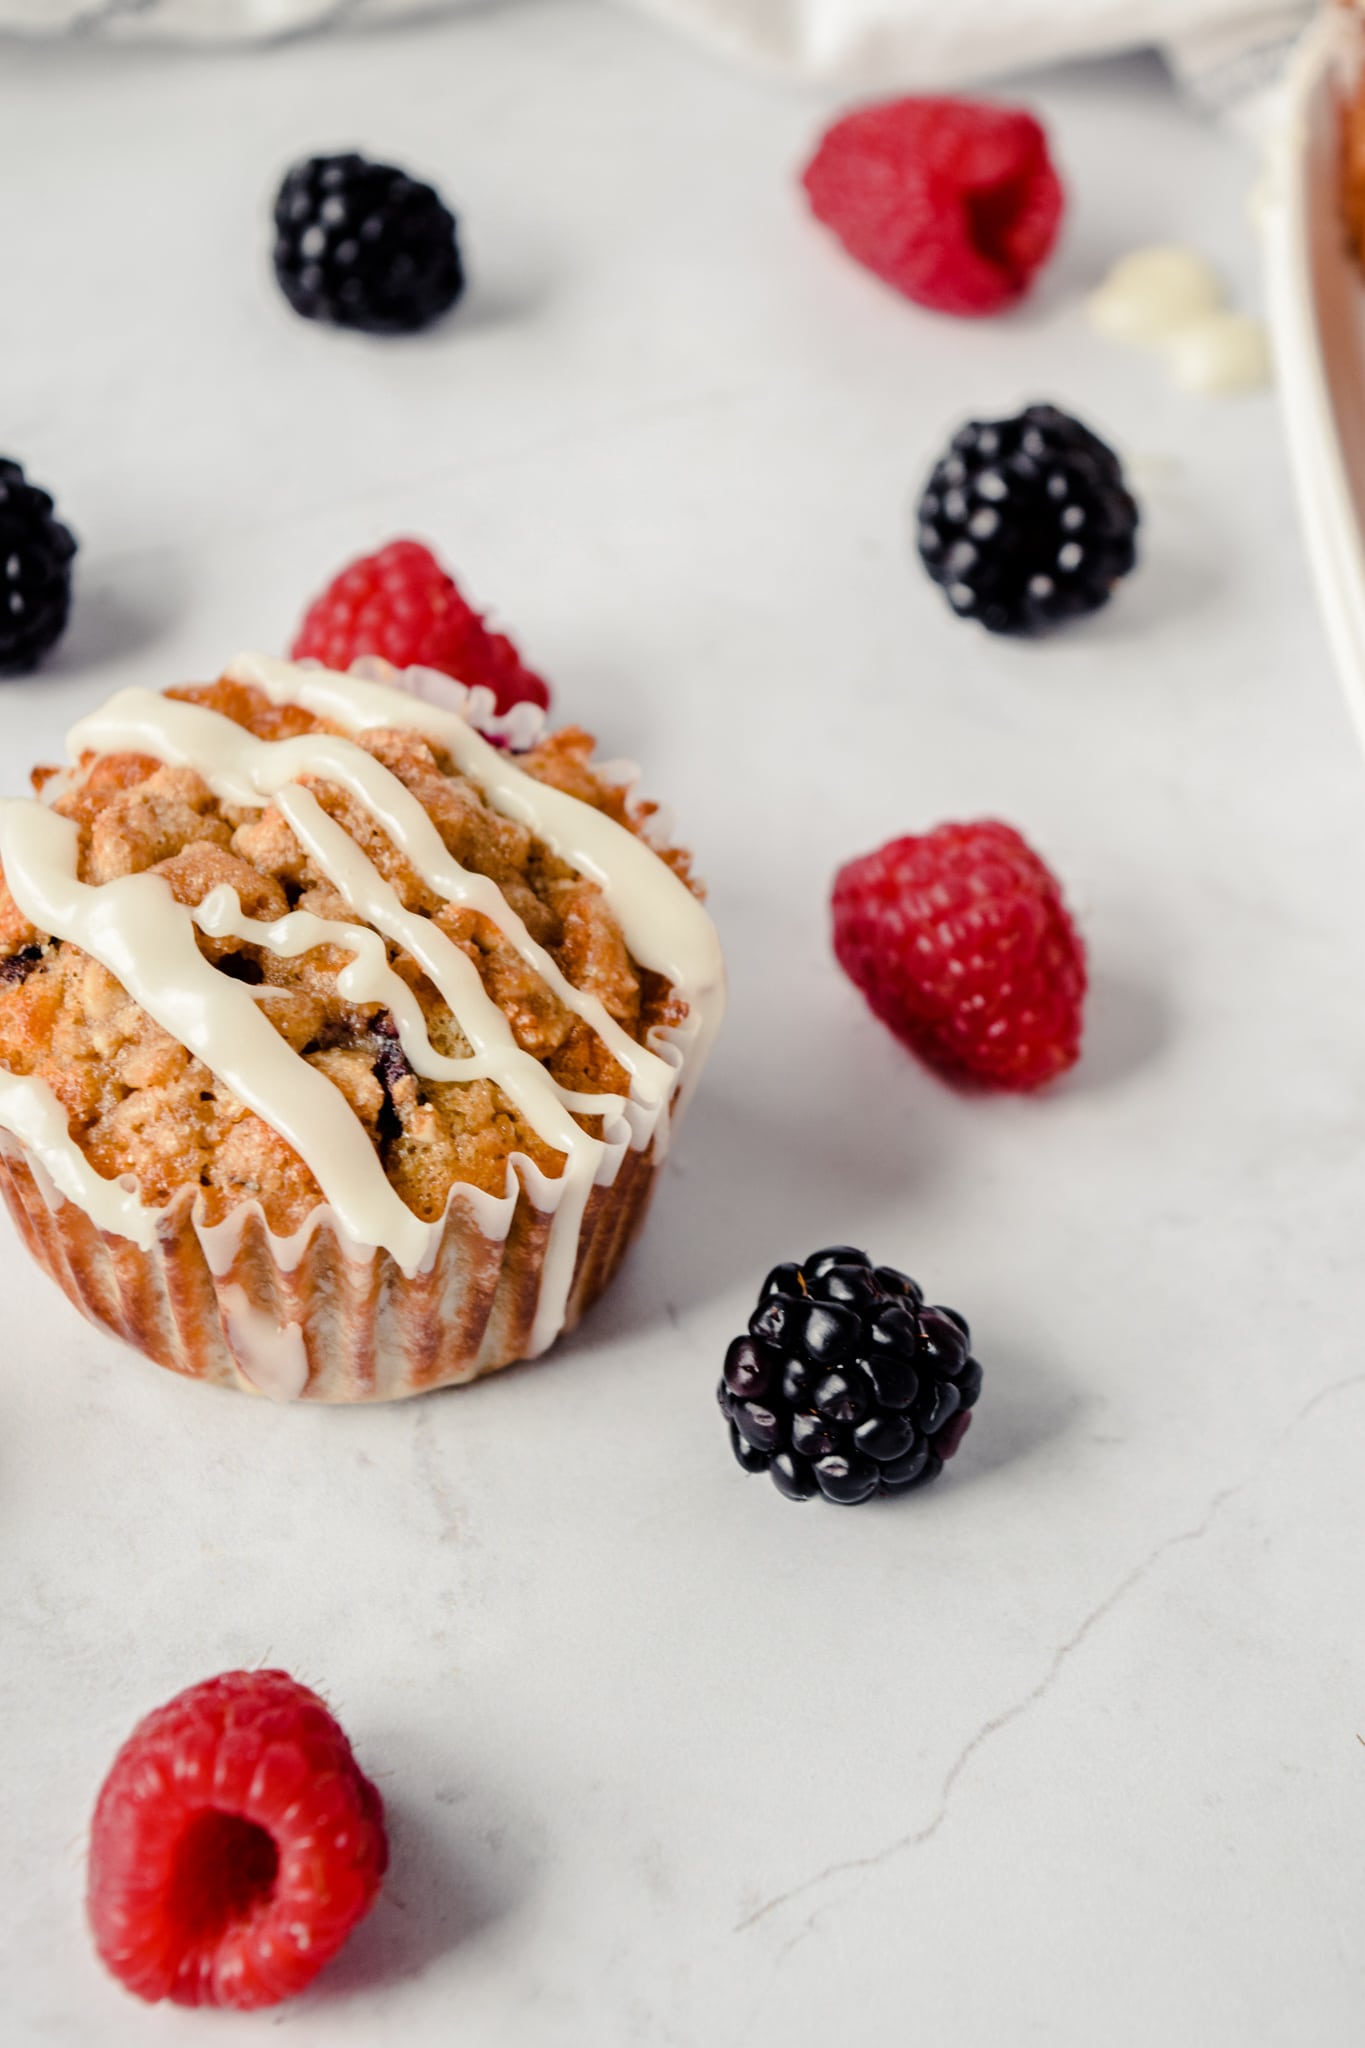 Mixed Berry Streusel Baked Oatmeal Muffins